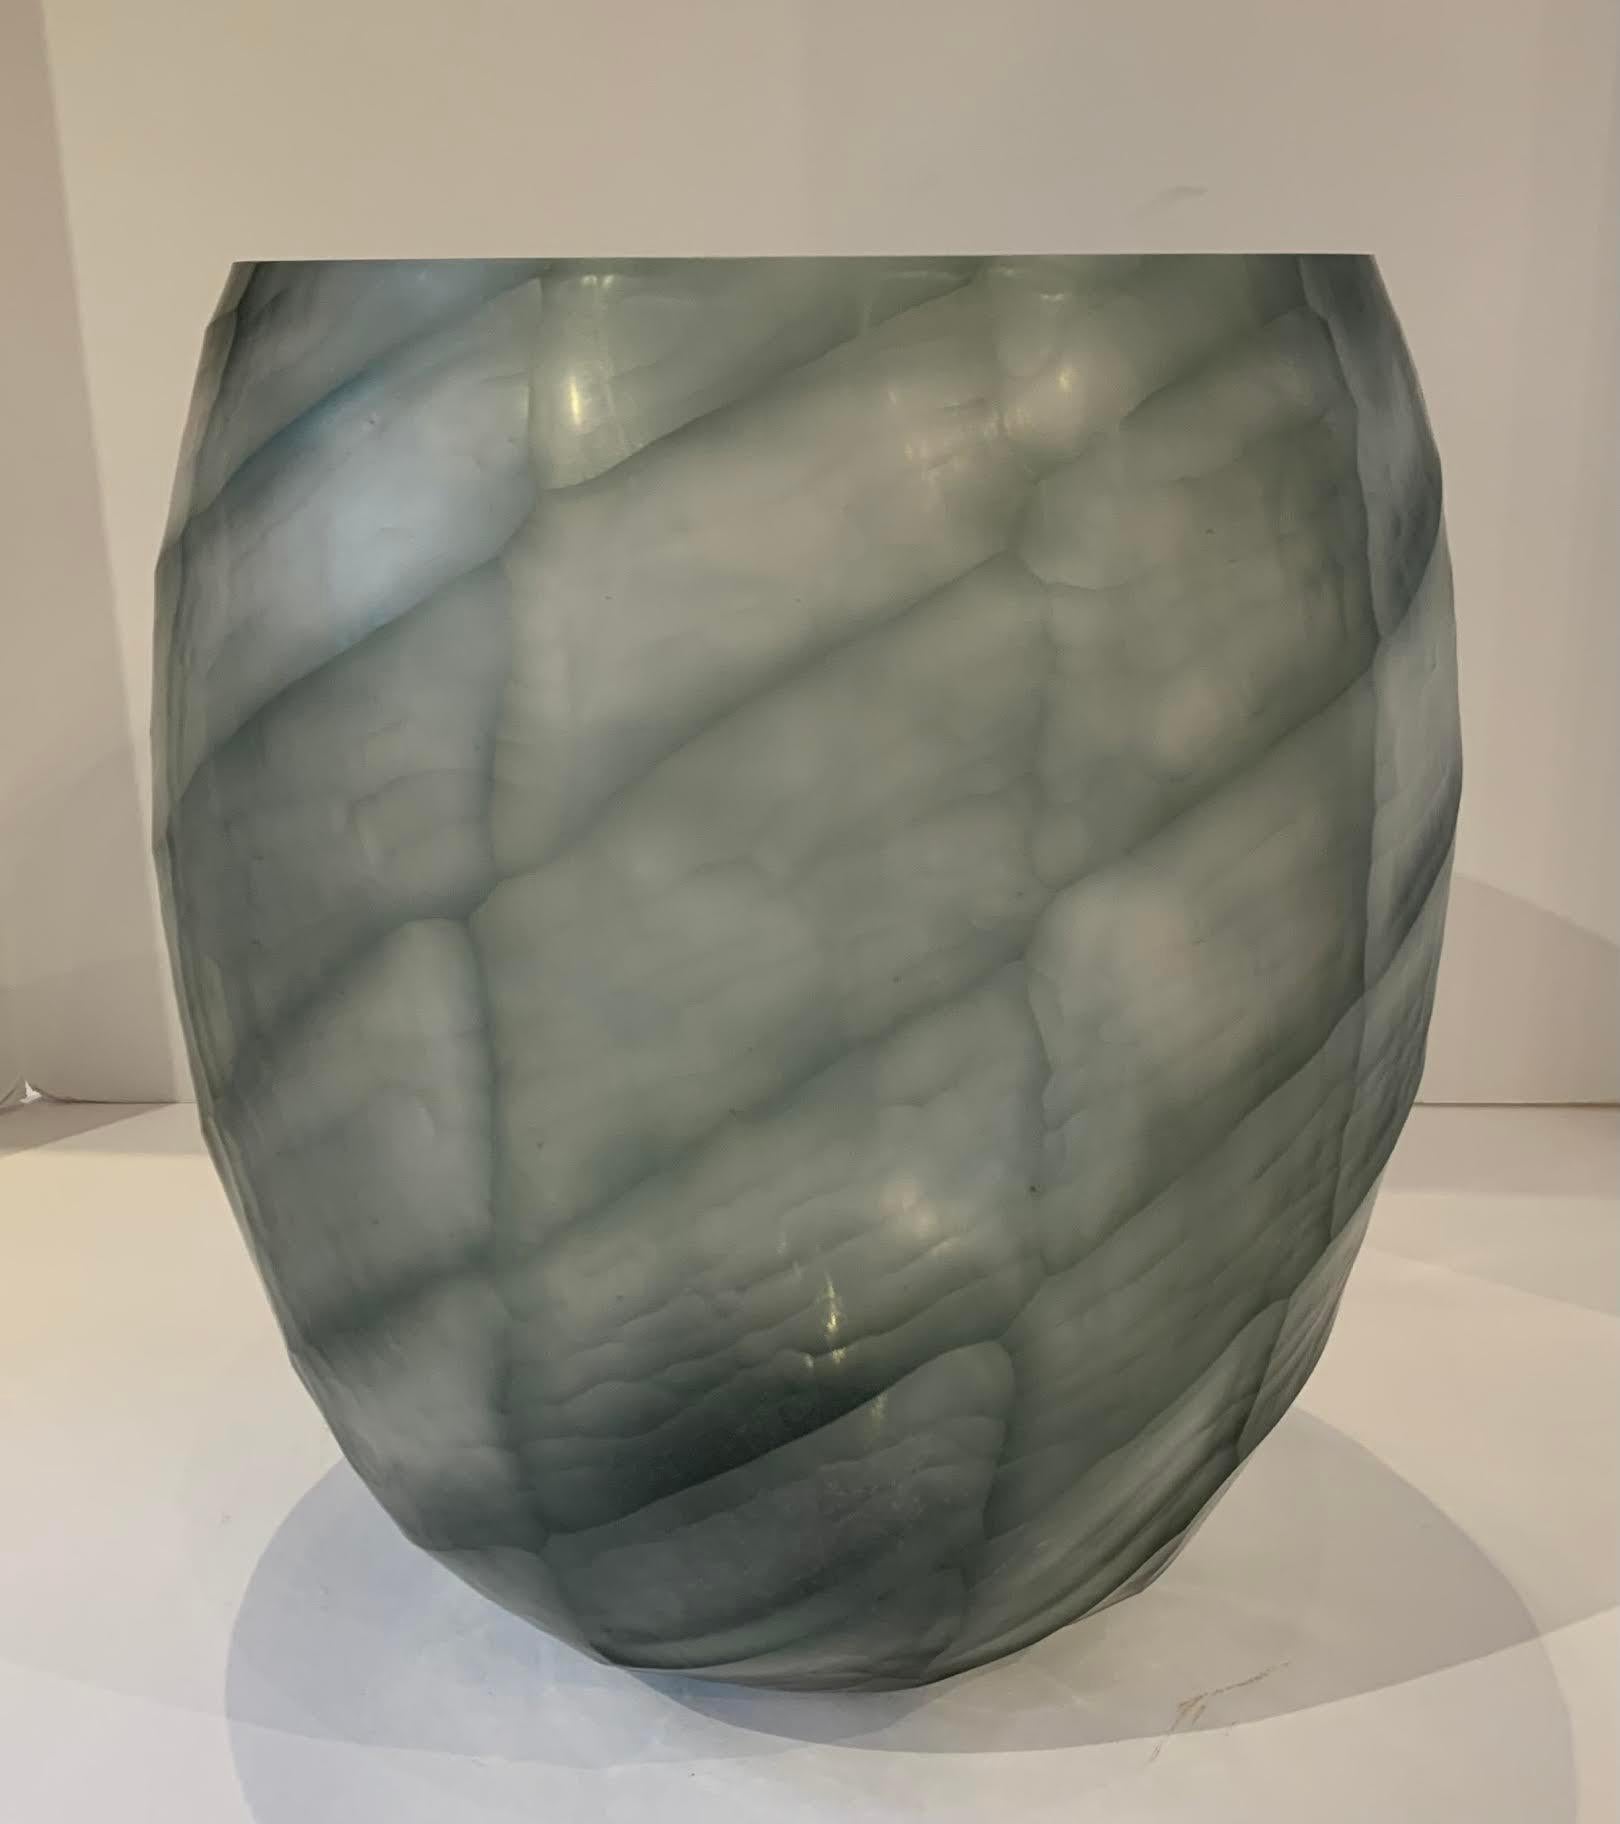 Contemporary Romanian glass vase with cut criss cross pattern design.
The design is transparent and appears to change color with the light.